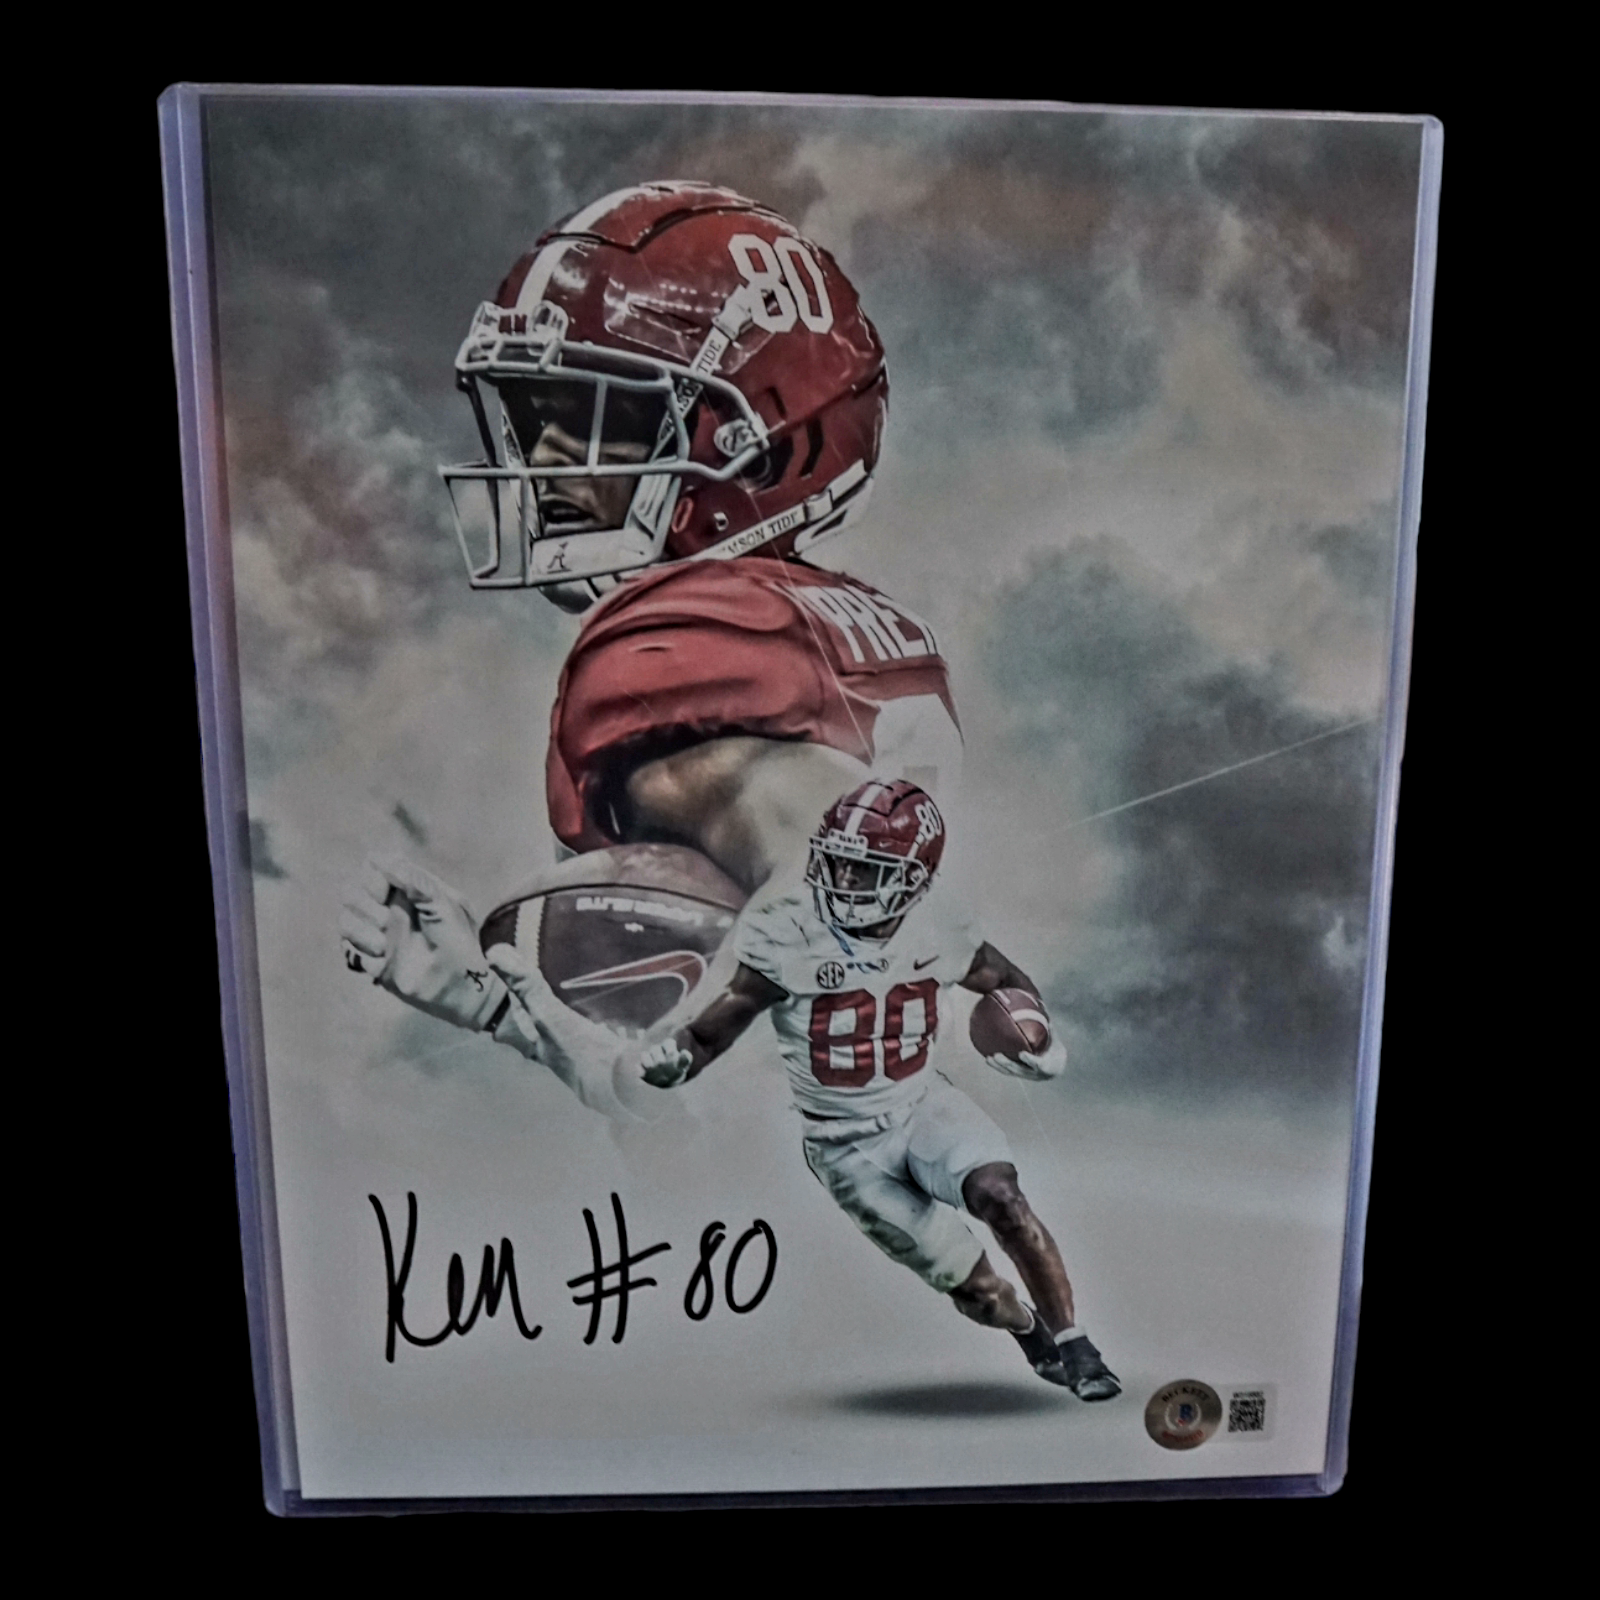 Alabama Kobe Prentice WR #80 - Signed in black sharpie or white paint with Beckett COA photograph 8x10